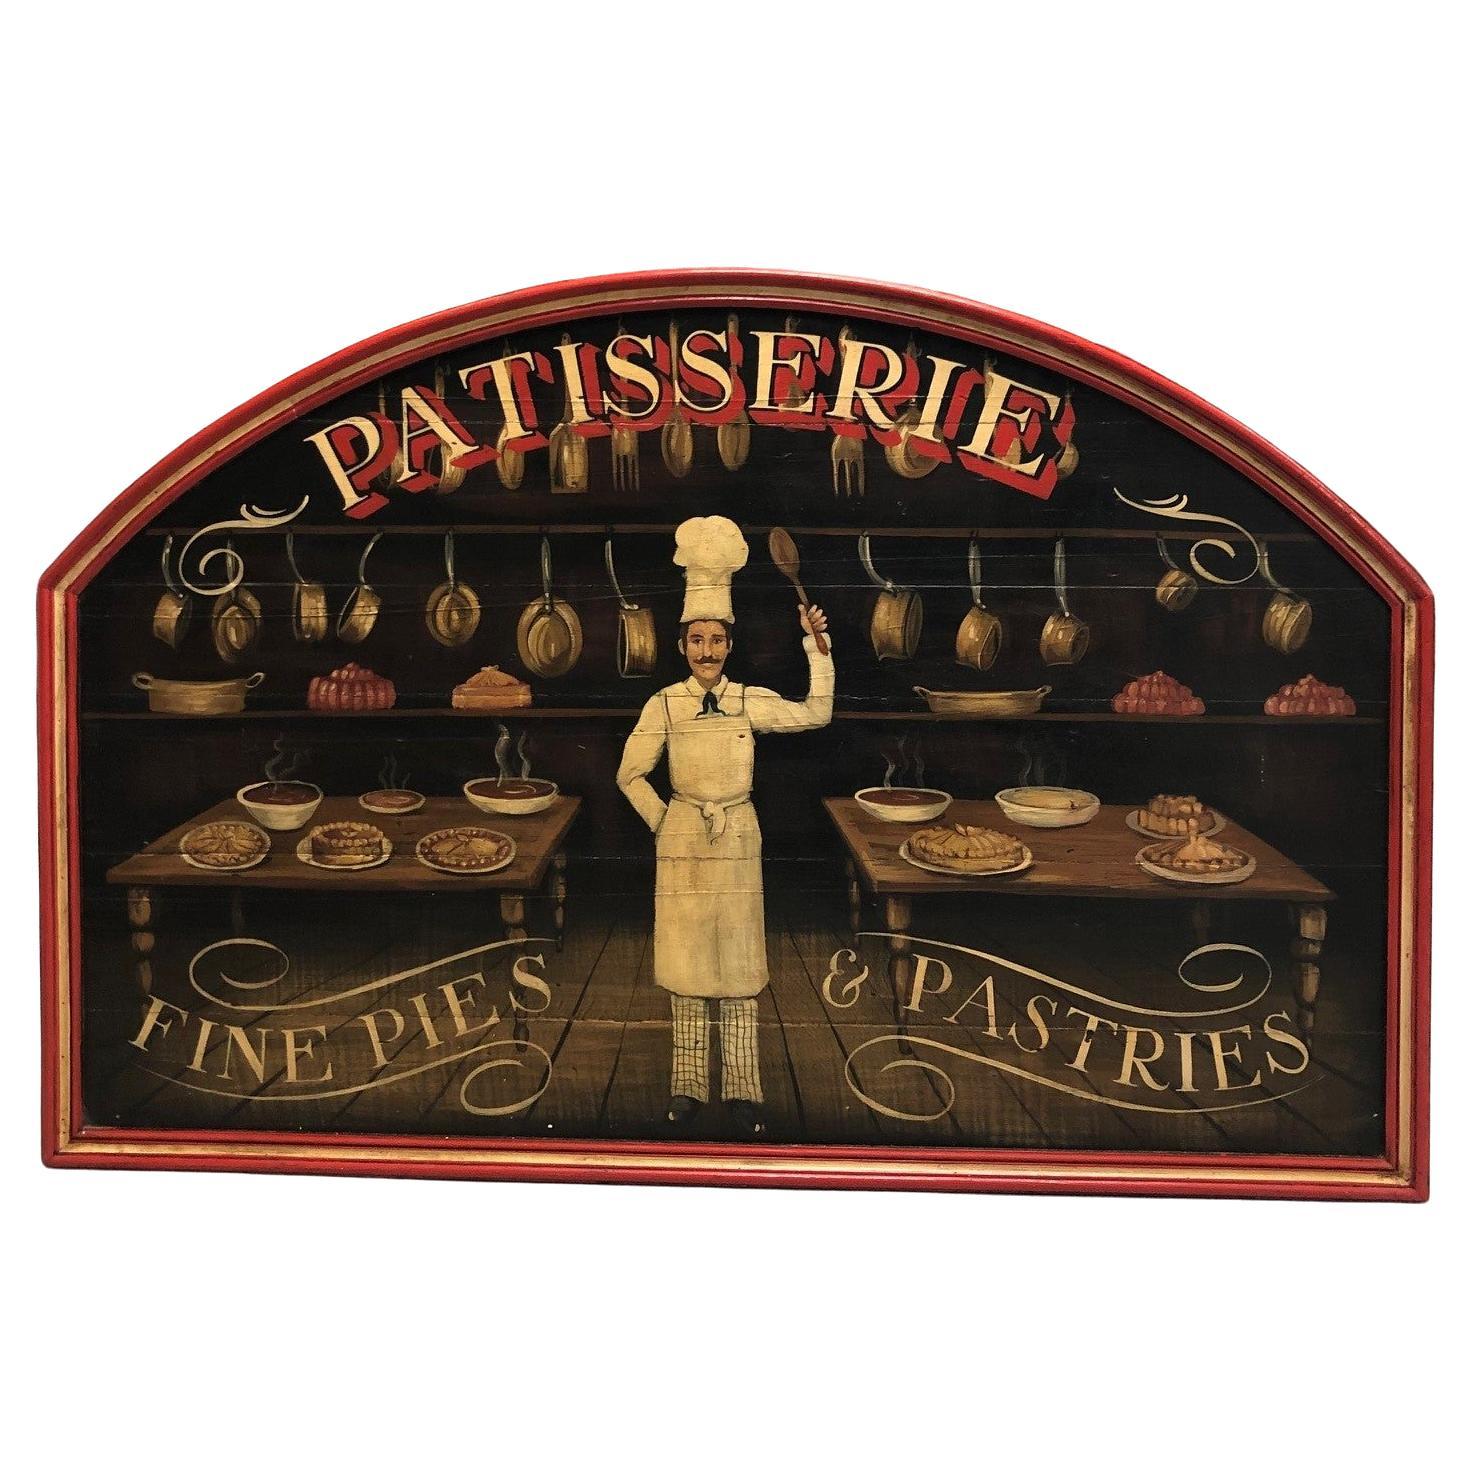 Late 20th Century Pastry Shop Sign Patisserie Fine Pies and Pastries